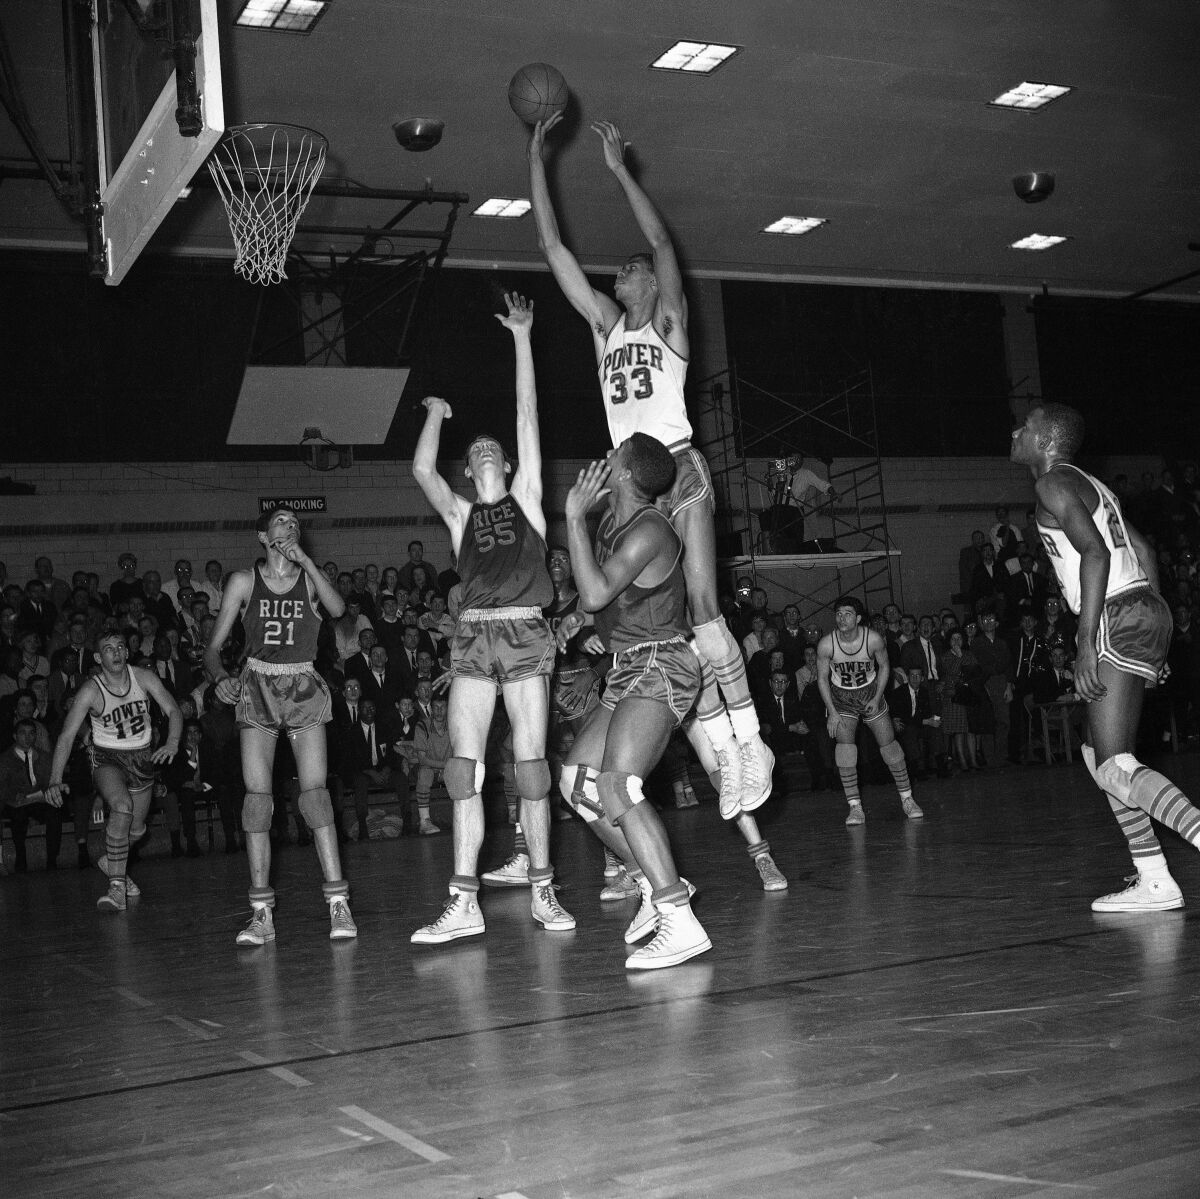 New York museum honors city #39 s rich basketball history The San Diego